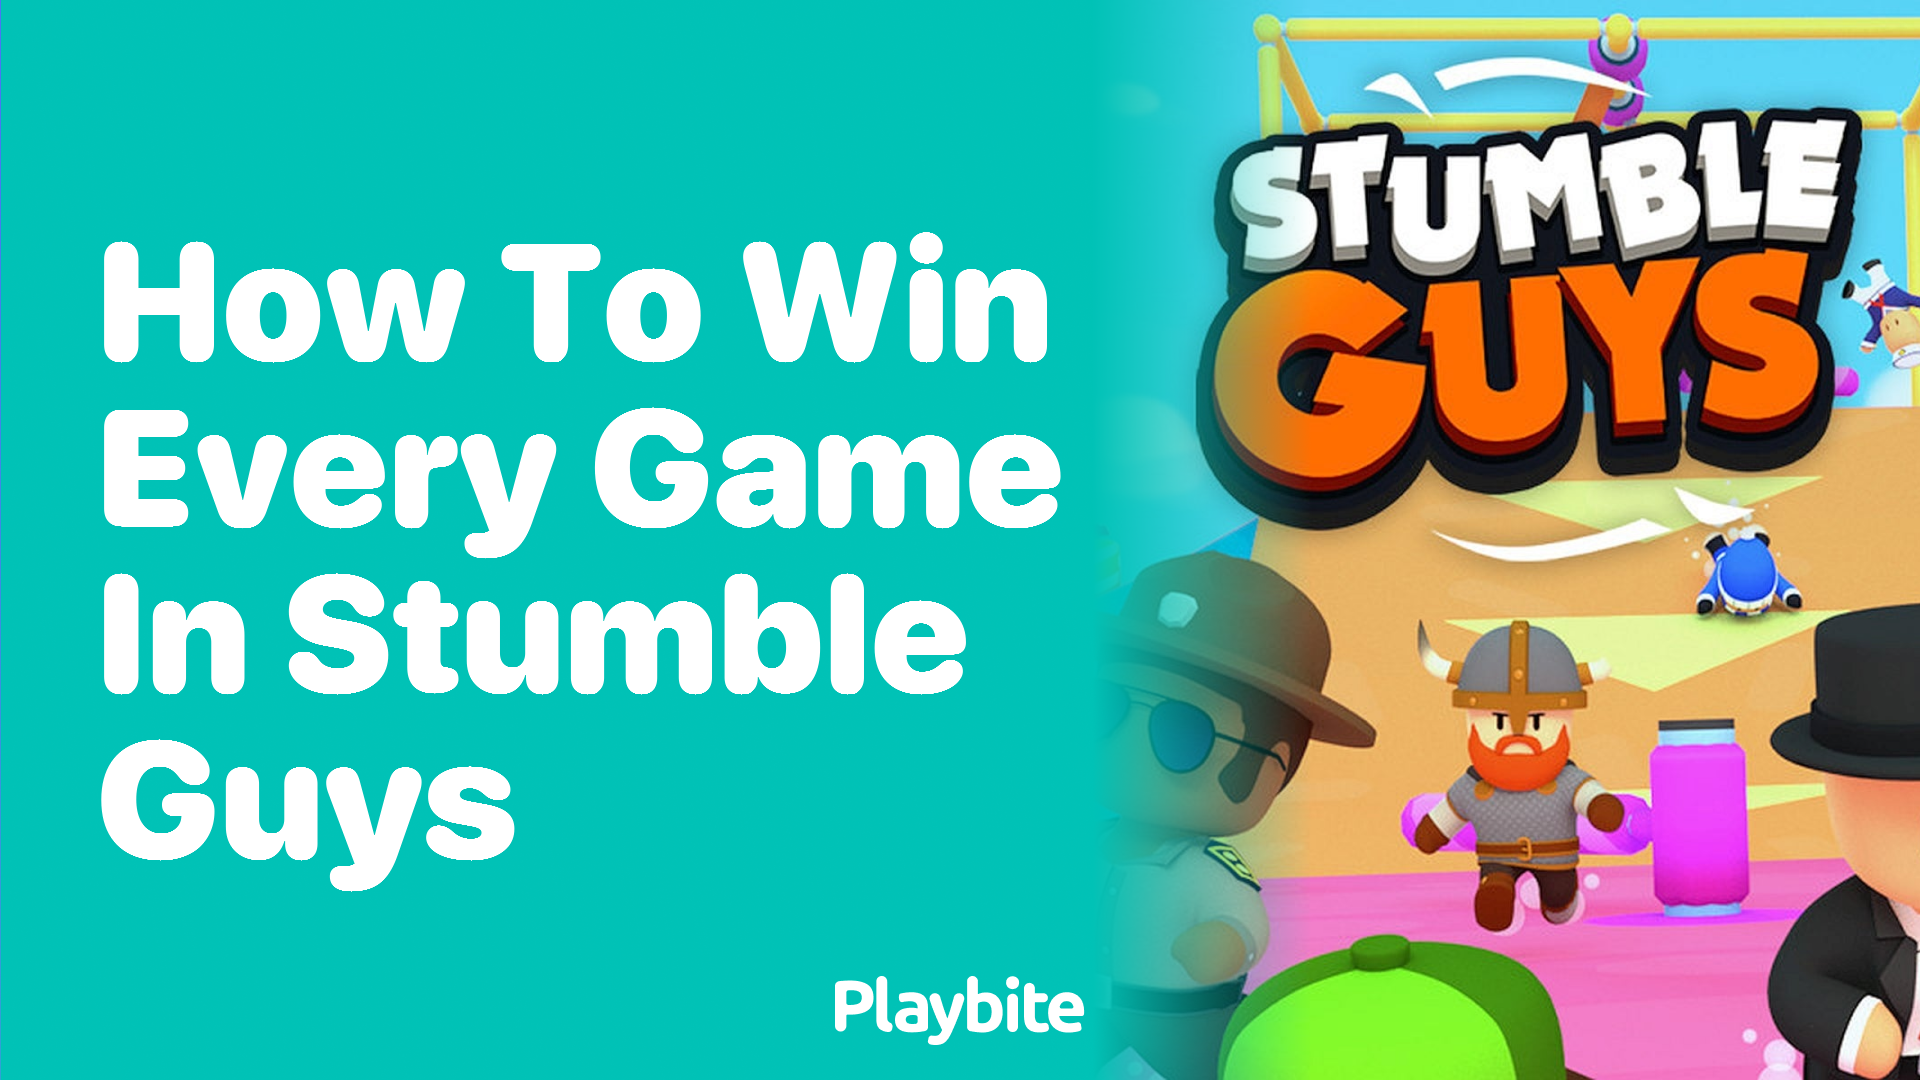 How to Win Every Game in Stumble Guys